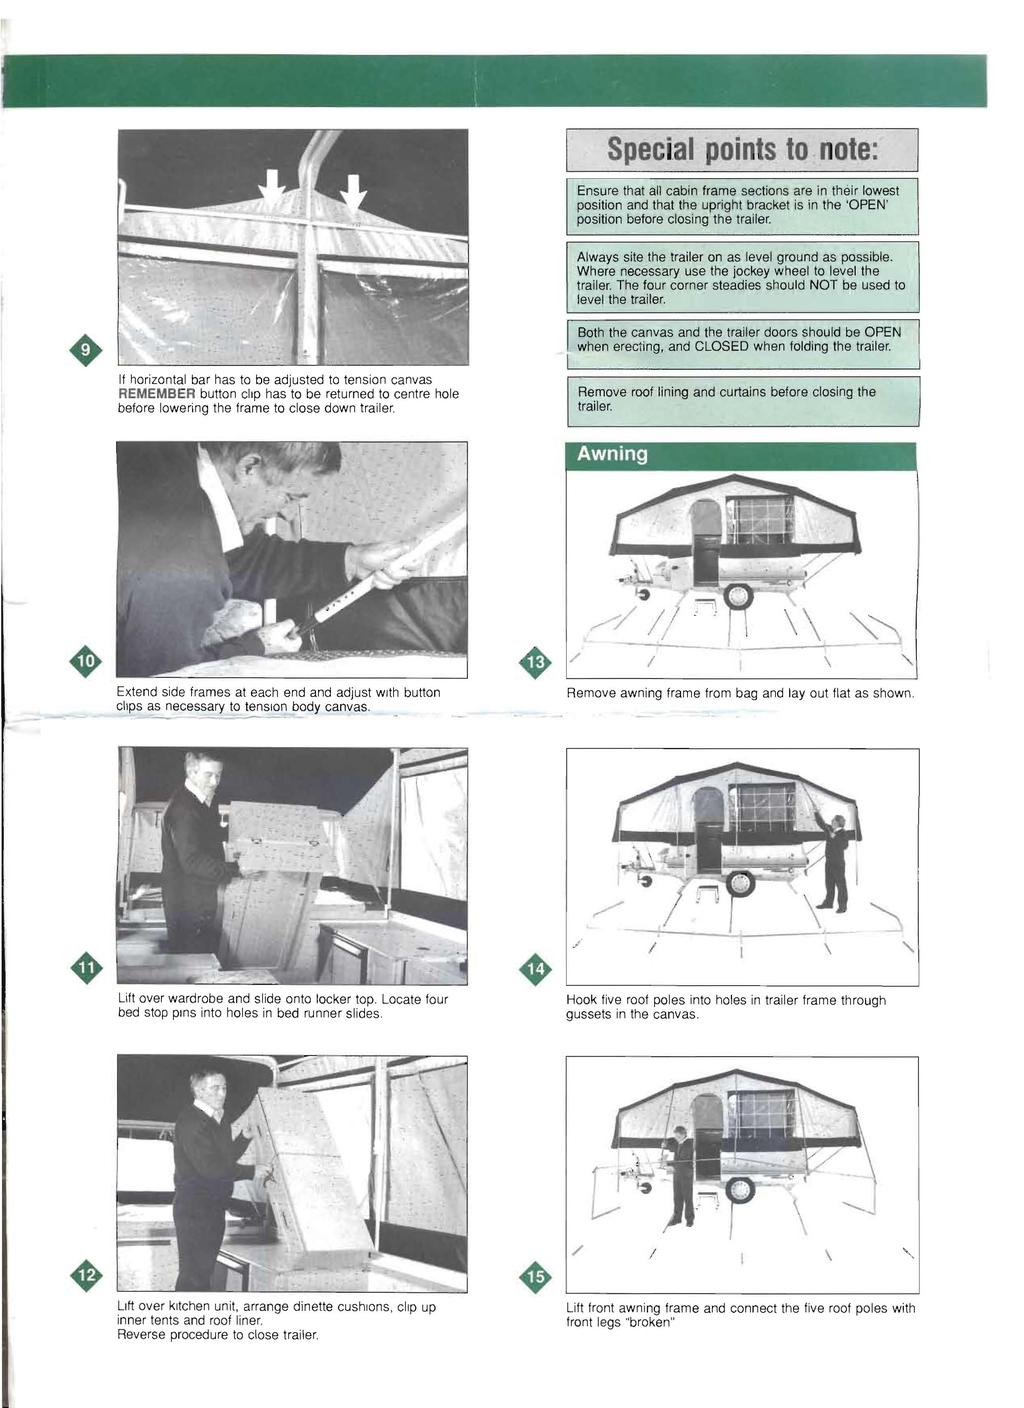 I - " Special points to ote: Ensure that all cabin frame sections are in their lowest position and that the upright bracket is in the 'OPEN' position before closing the trailer.